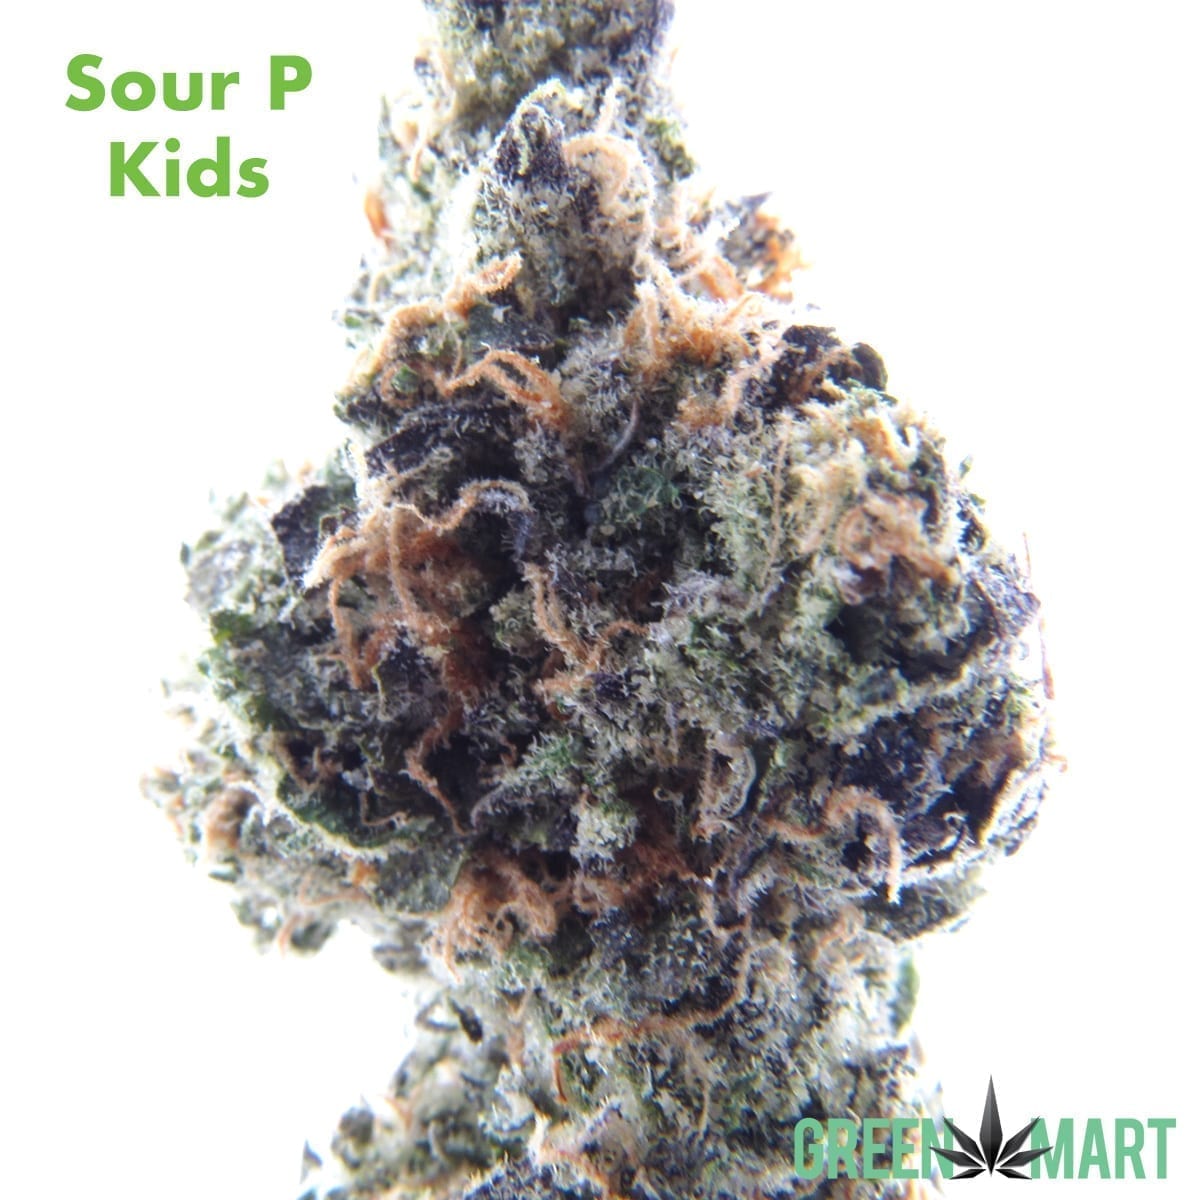 Sour P Kids by Pacific Grove